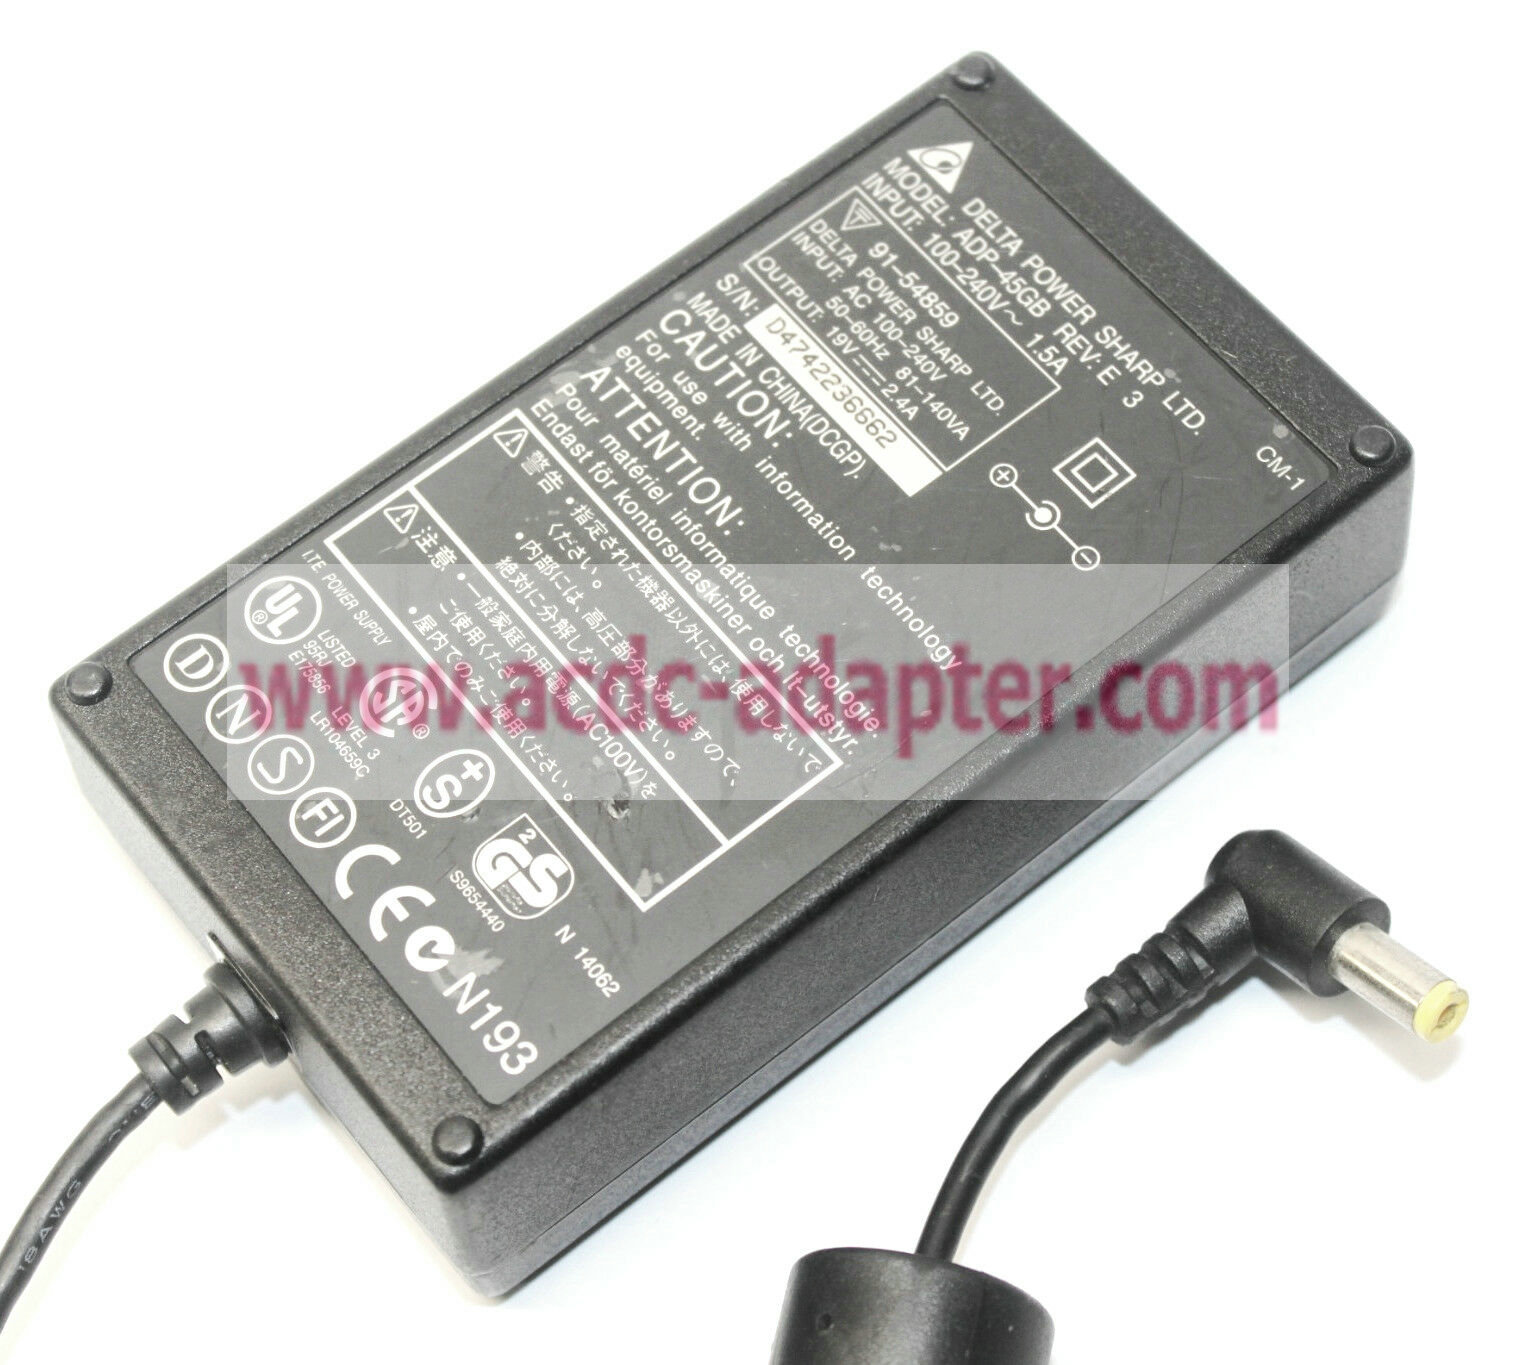 NEW Delta Power Sharp ADP-45GB ITE Power Supply DC 19V 2.4A AC Adapter